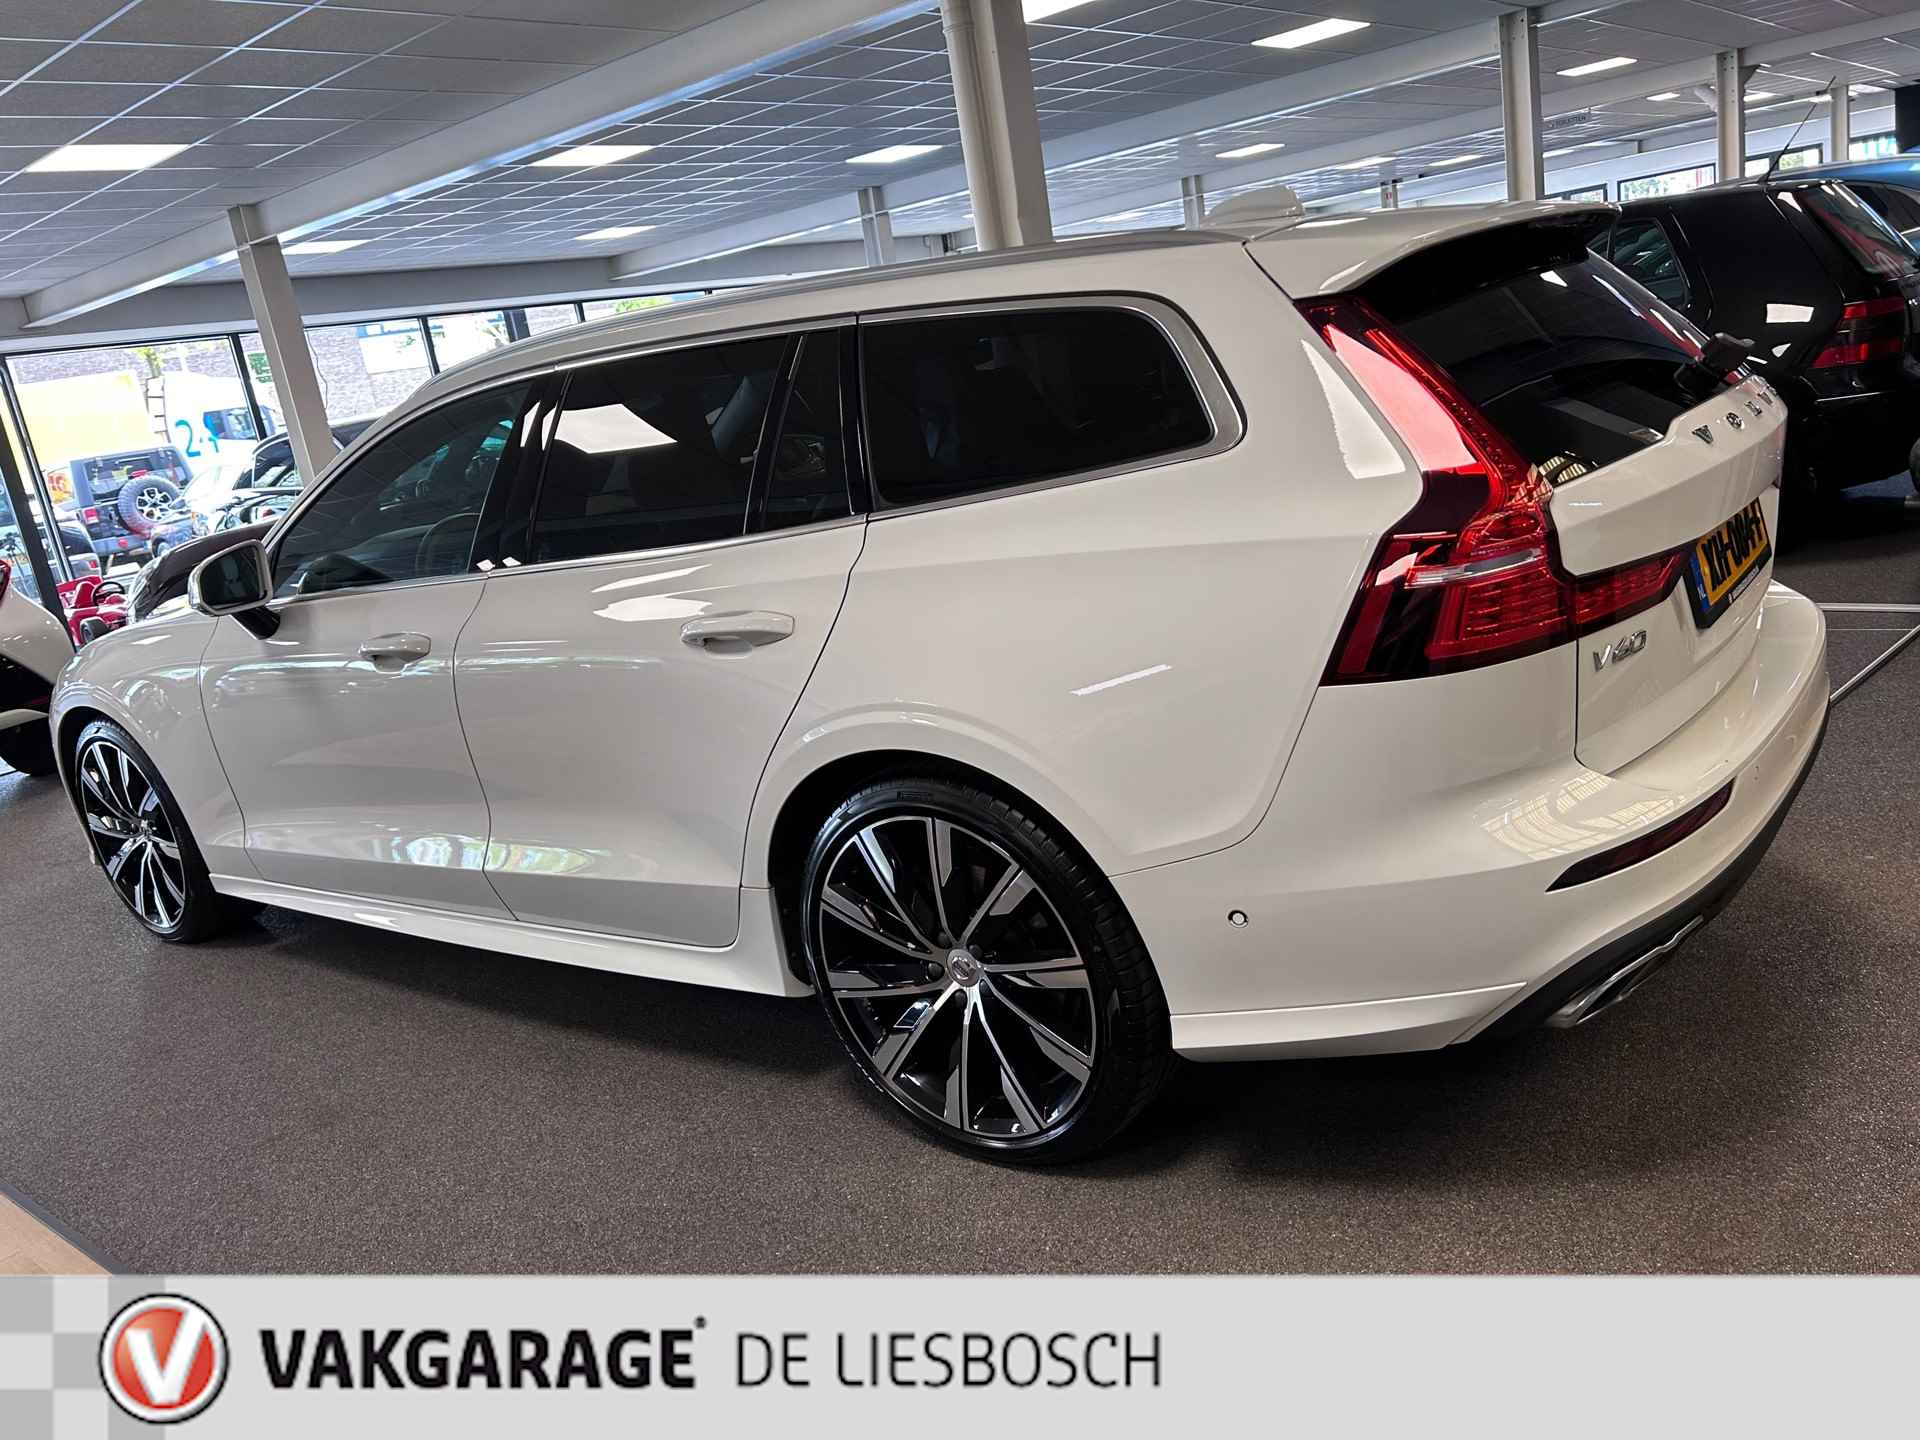 Volvo V60 2.0 T5 Momentum/Styling kit/Automaat/Led/20inch/360 camera - 5/34